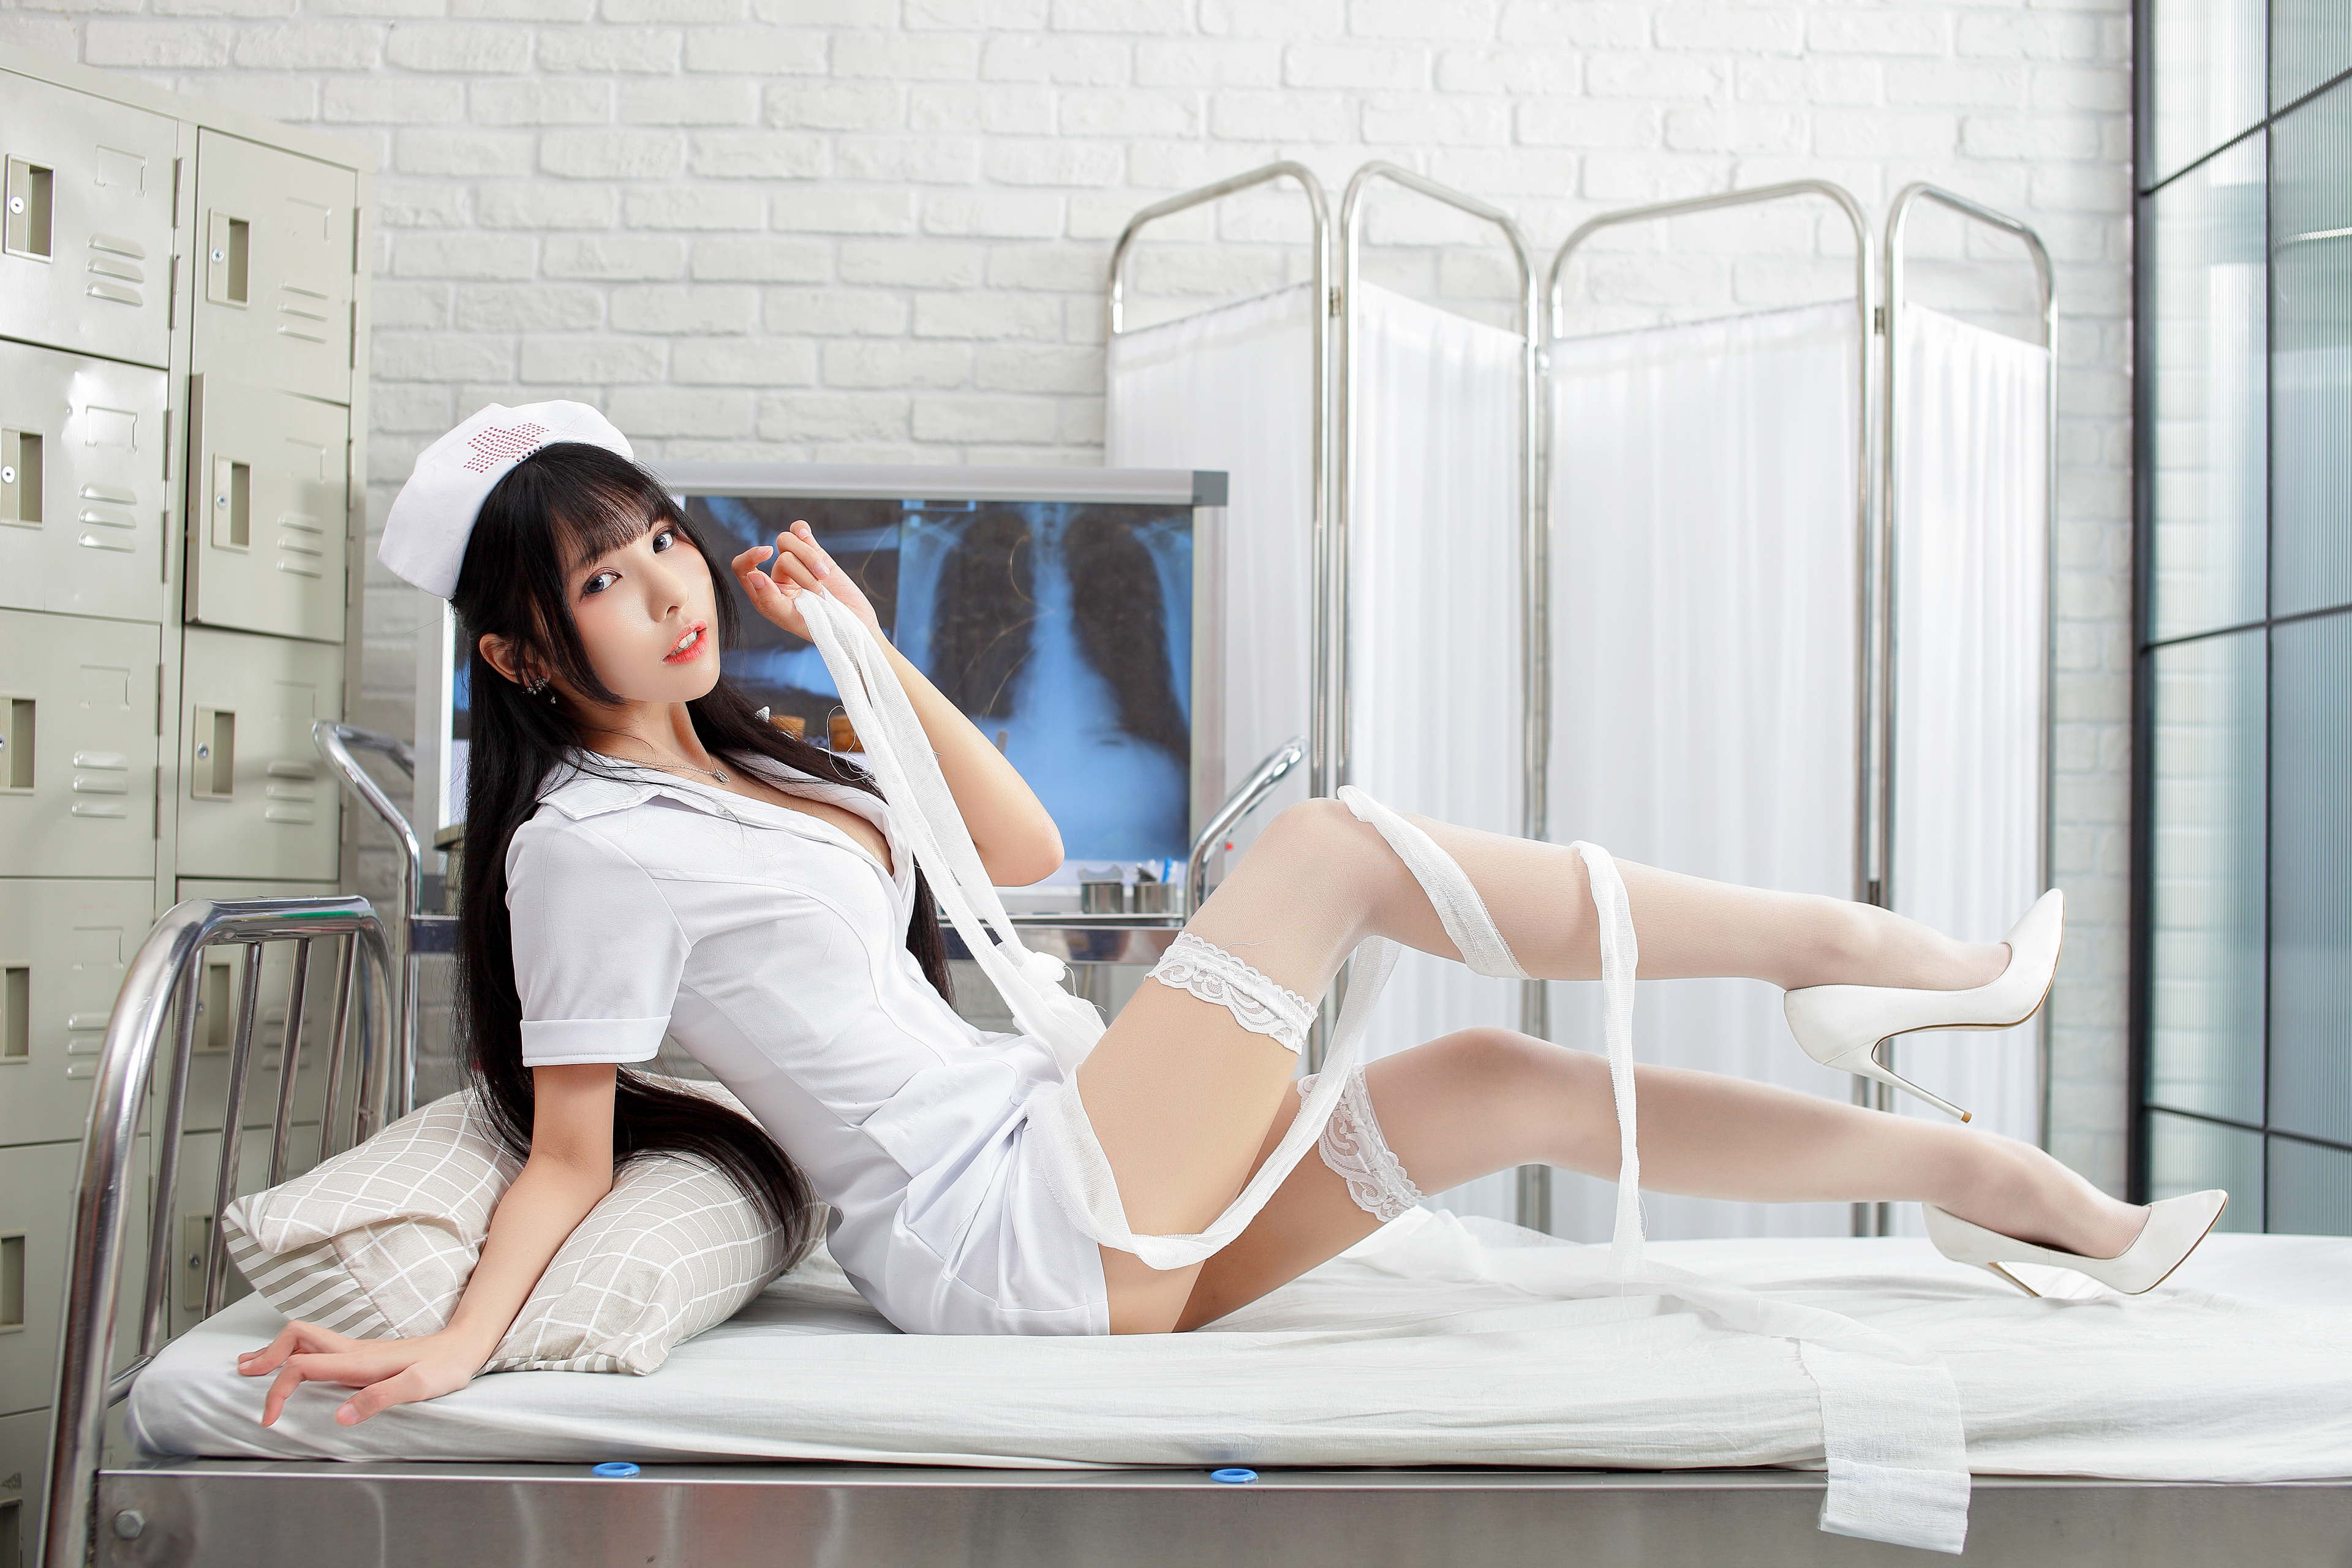 Asian Model Women Long Hair Dark Hair Vicky Asian Model Nurse Outfit White Heels Bed Cabinets X Rays 3840x2560